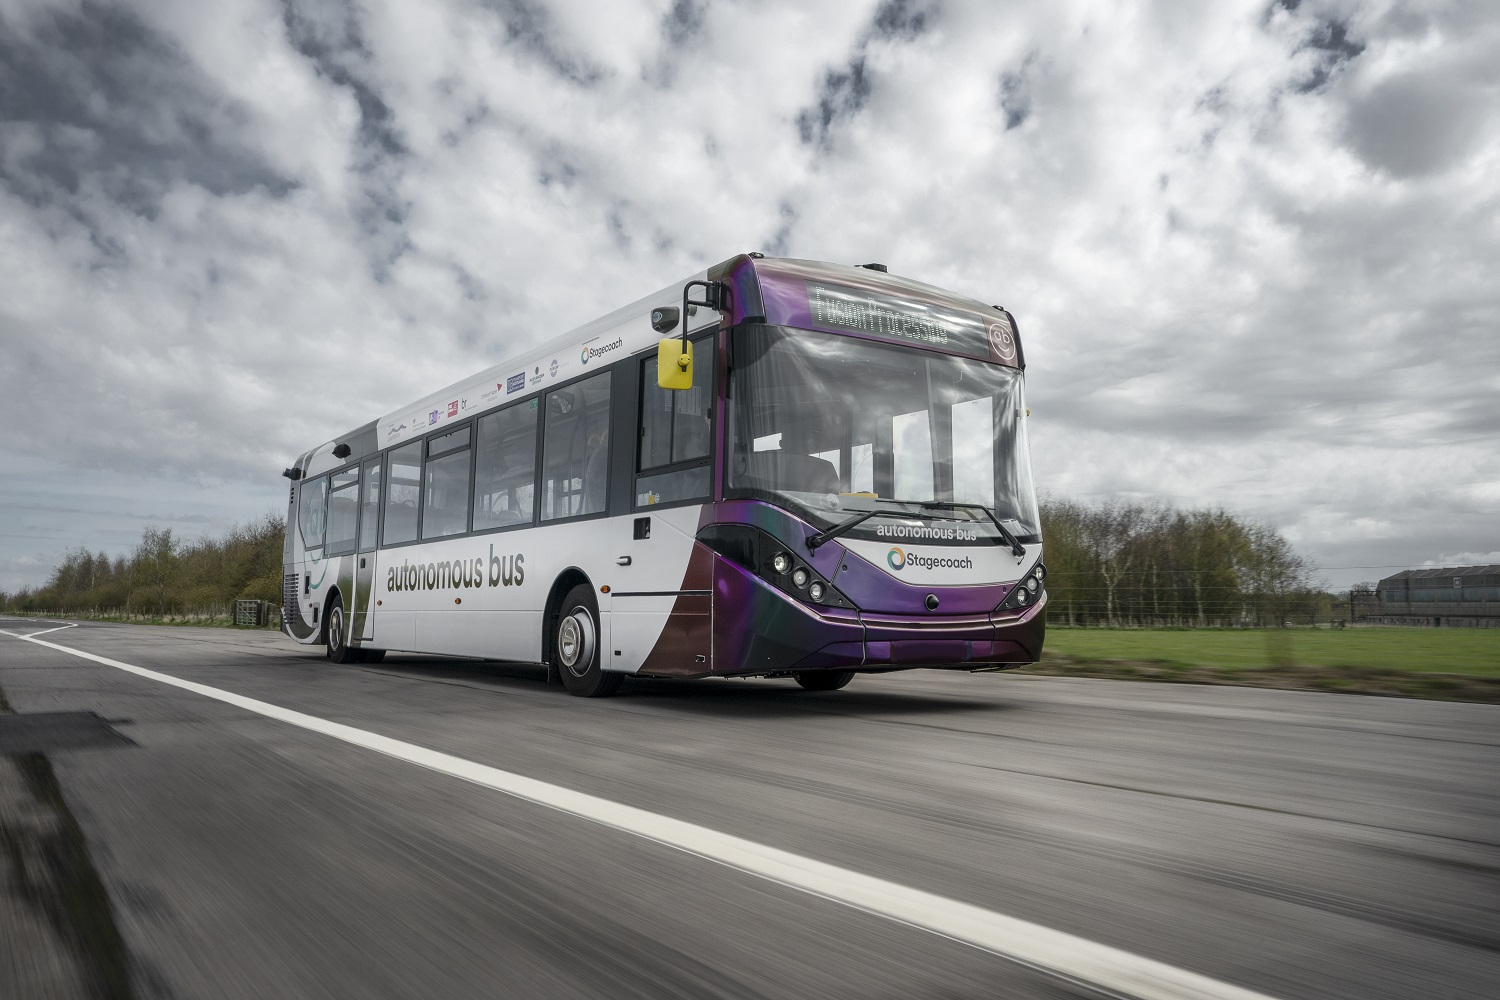 UK’s first full-size autonomous bus service on the roads